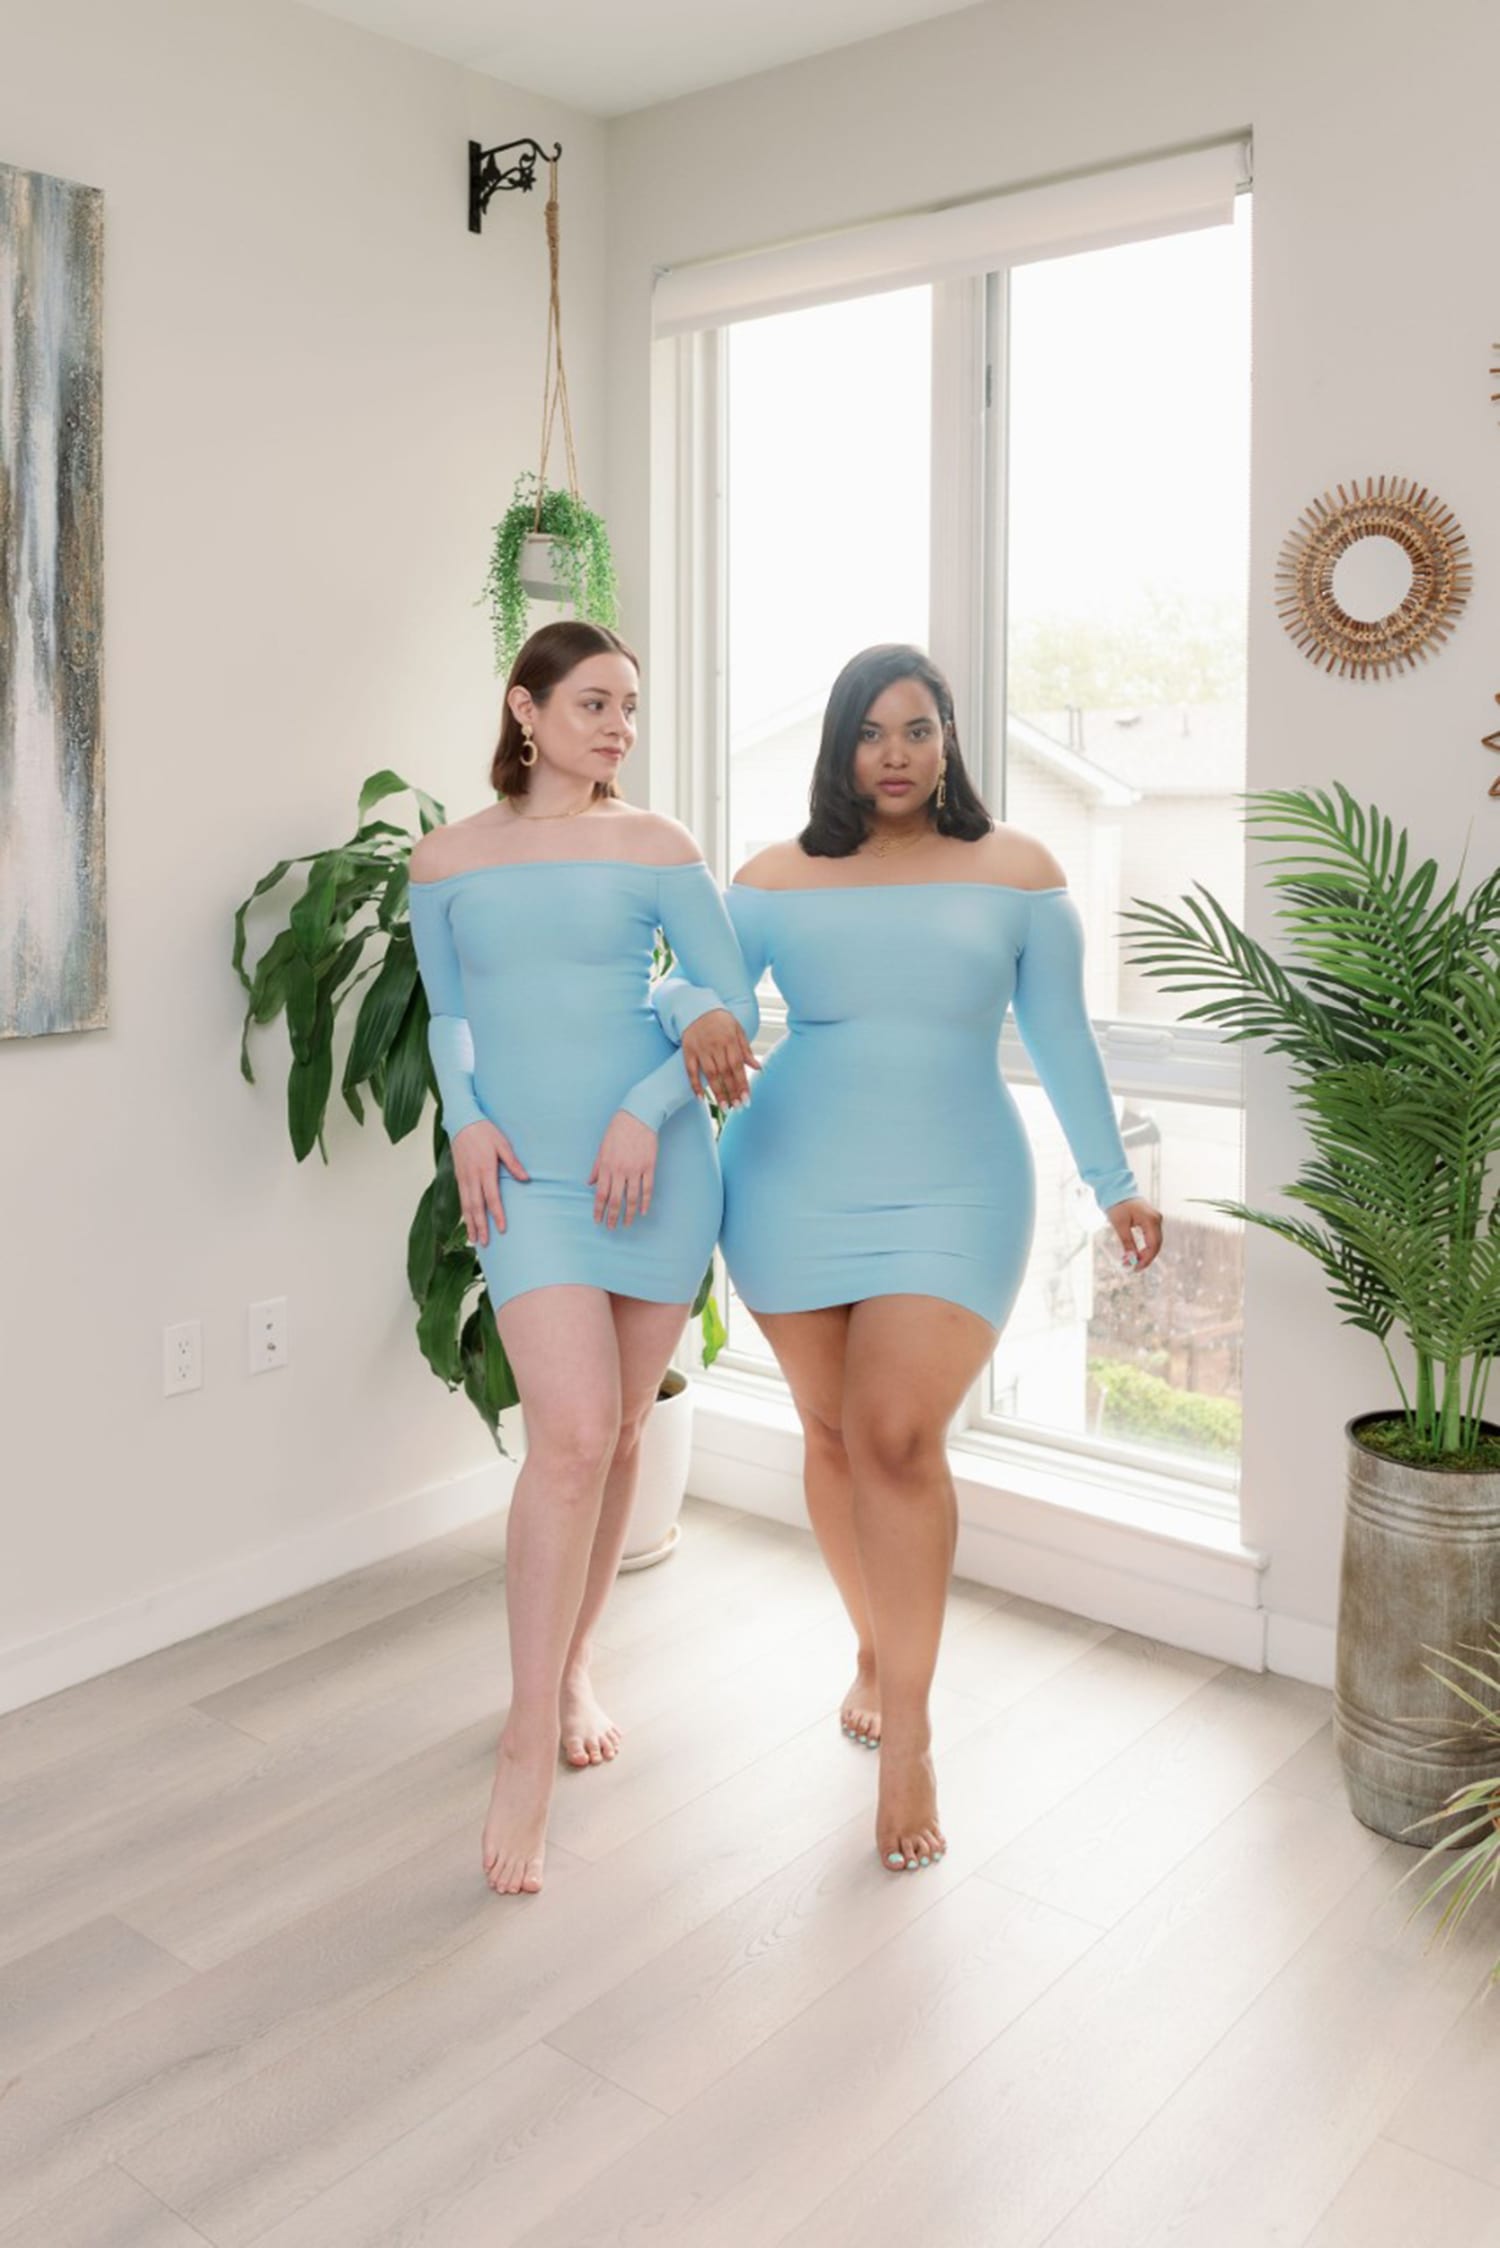 I'm an XXL & my bestie's a medium - we tried the exact same outfits & they  looked amazing on both of us